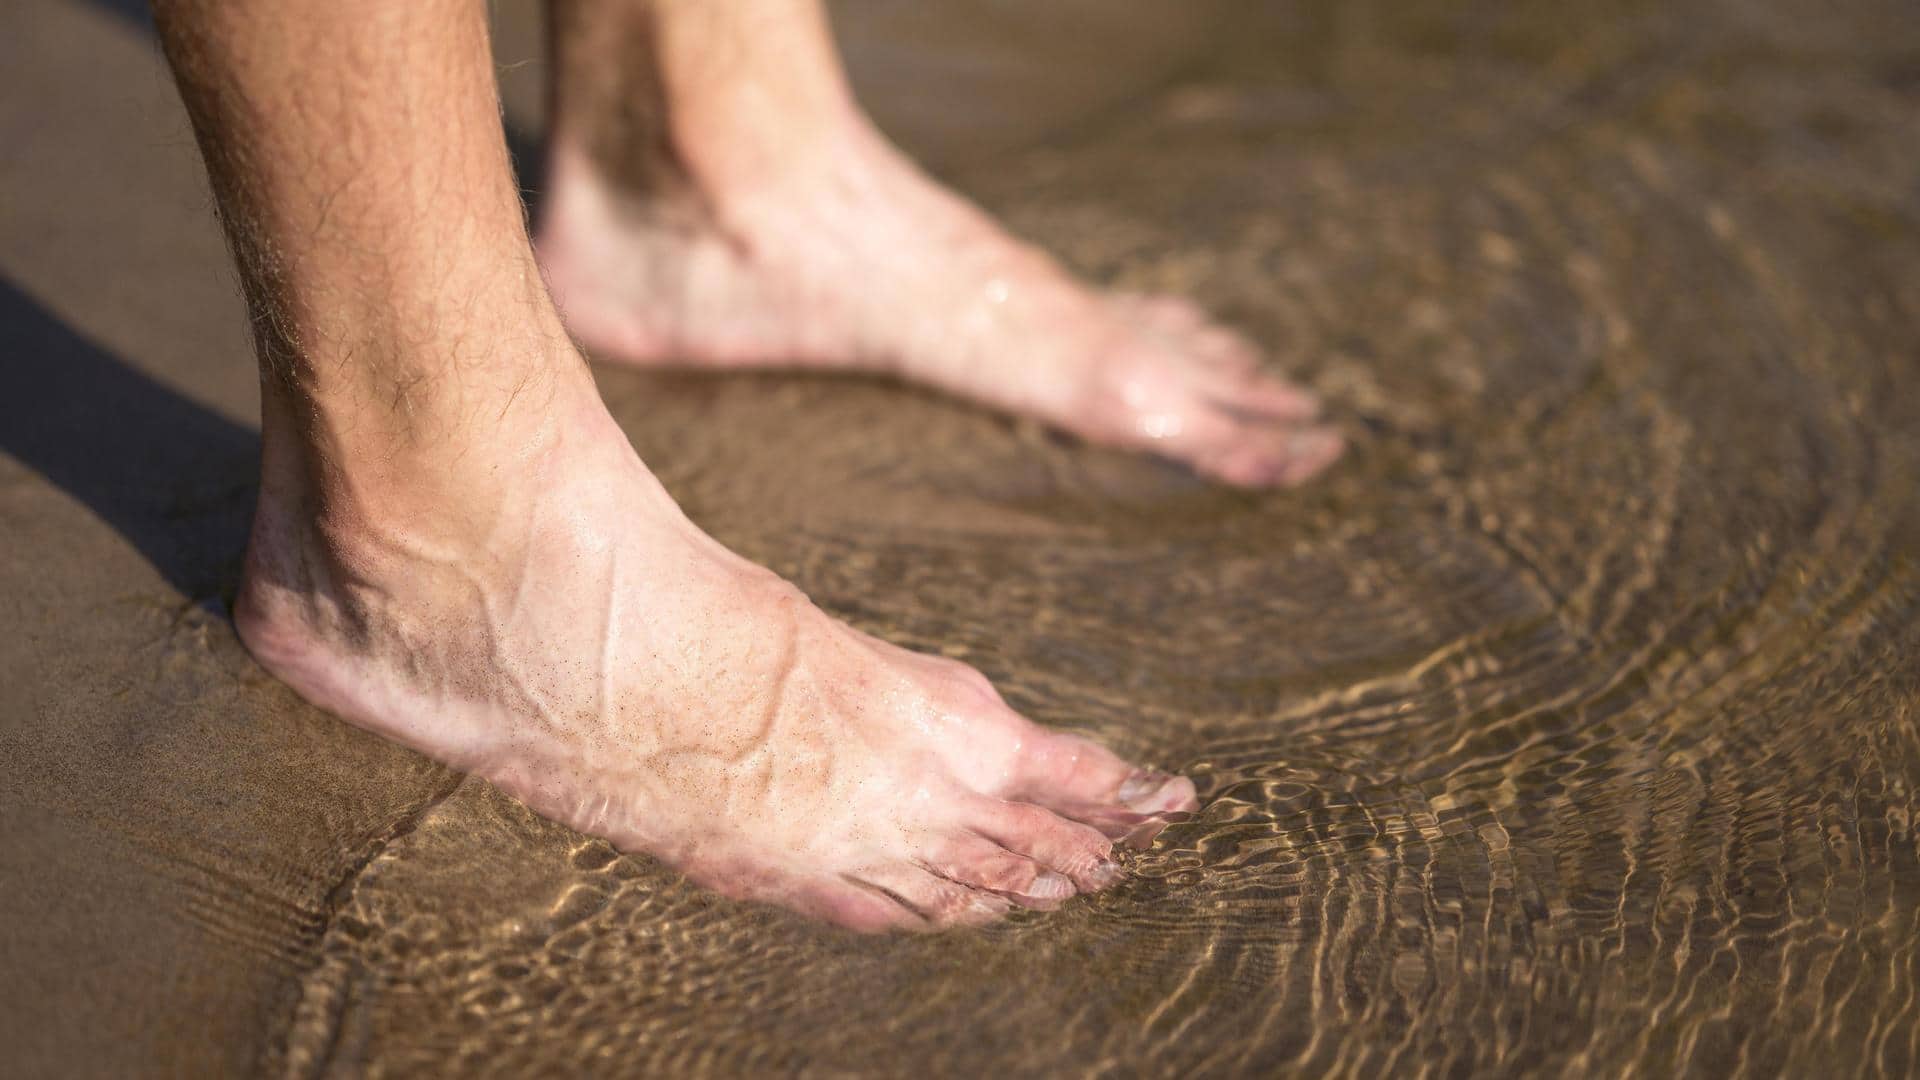 Monsoon foot care: Common problems and remedies that work